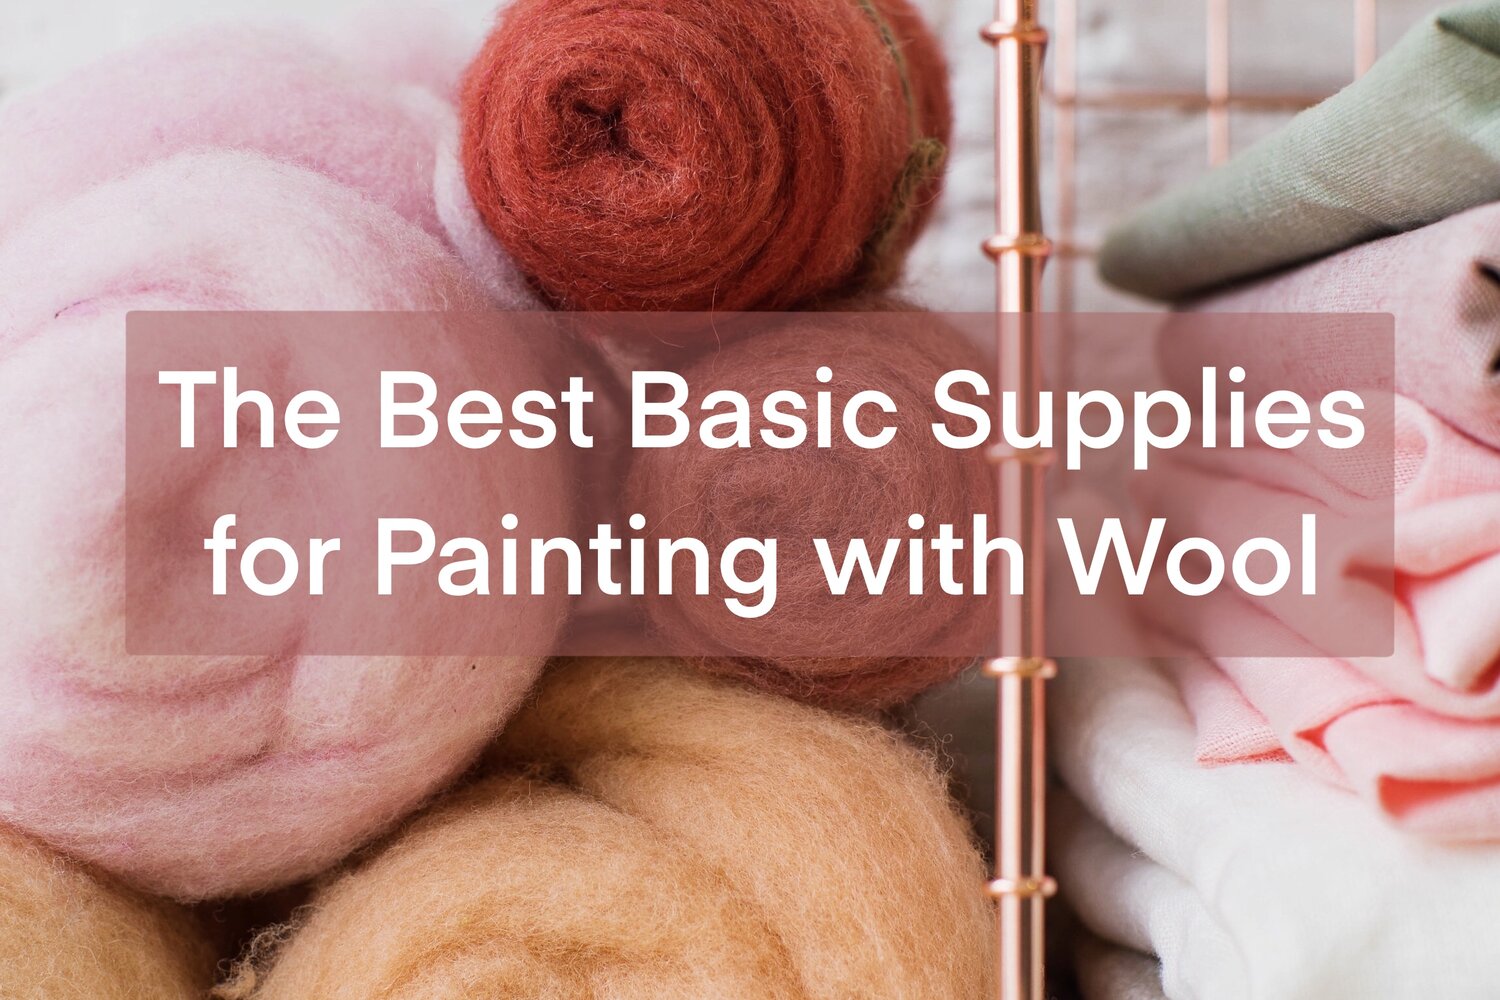 Needle Felting: A How-To Guide for 'Painting with Wool